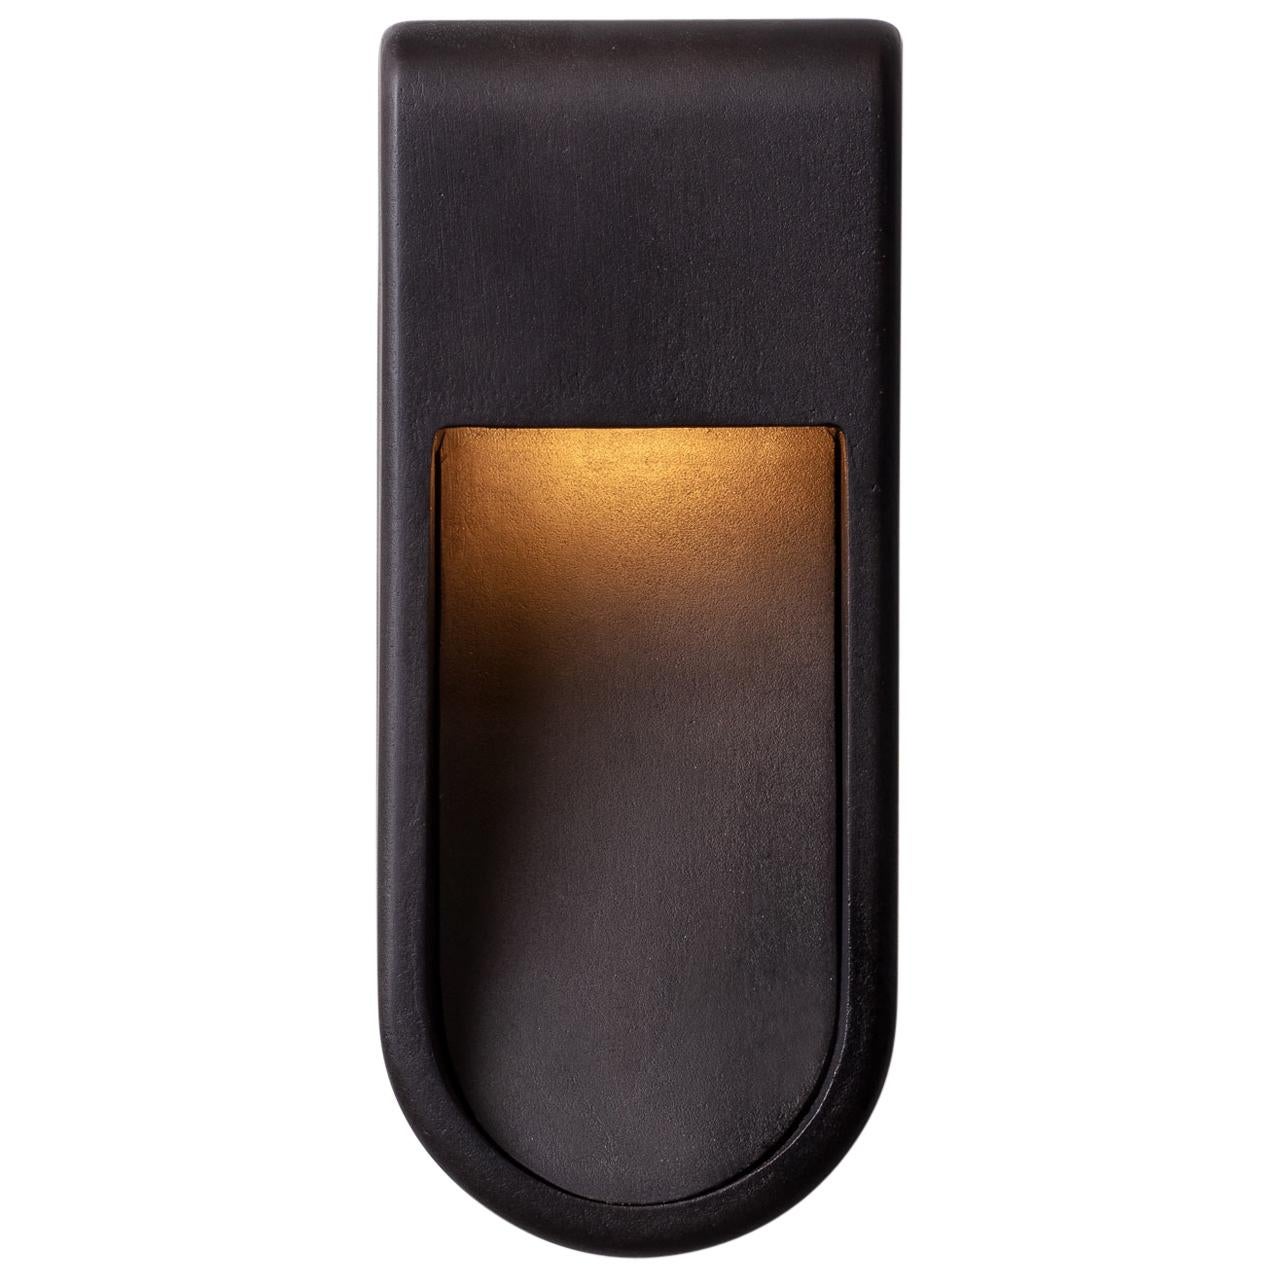 Kyoto Indoor Outdoor Led Sconce Poured Aluminum Blackened Size Long Wet Rating For Sale